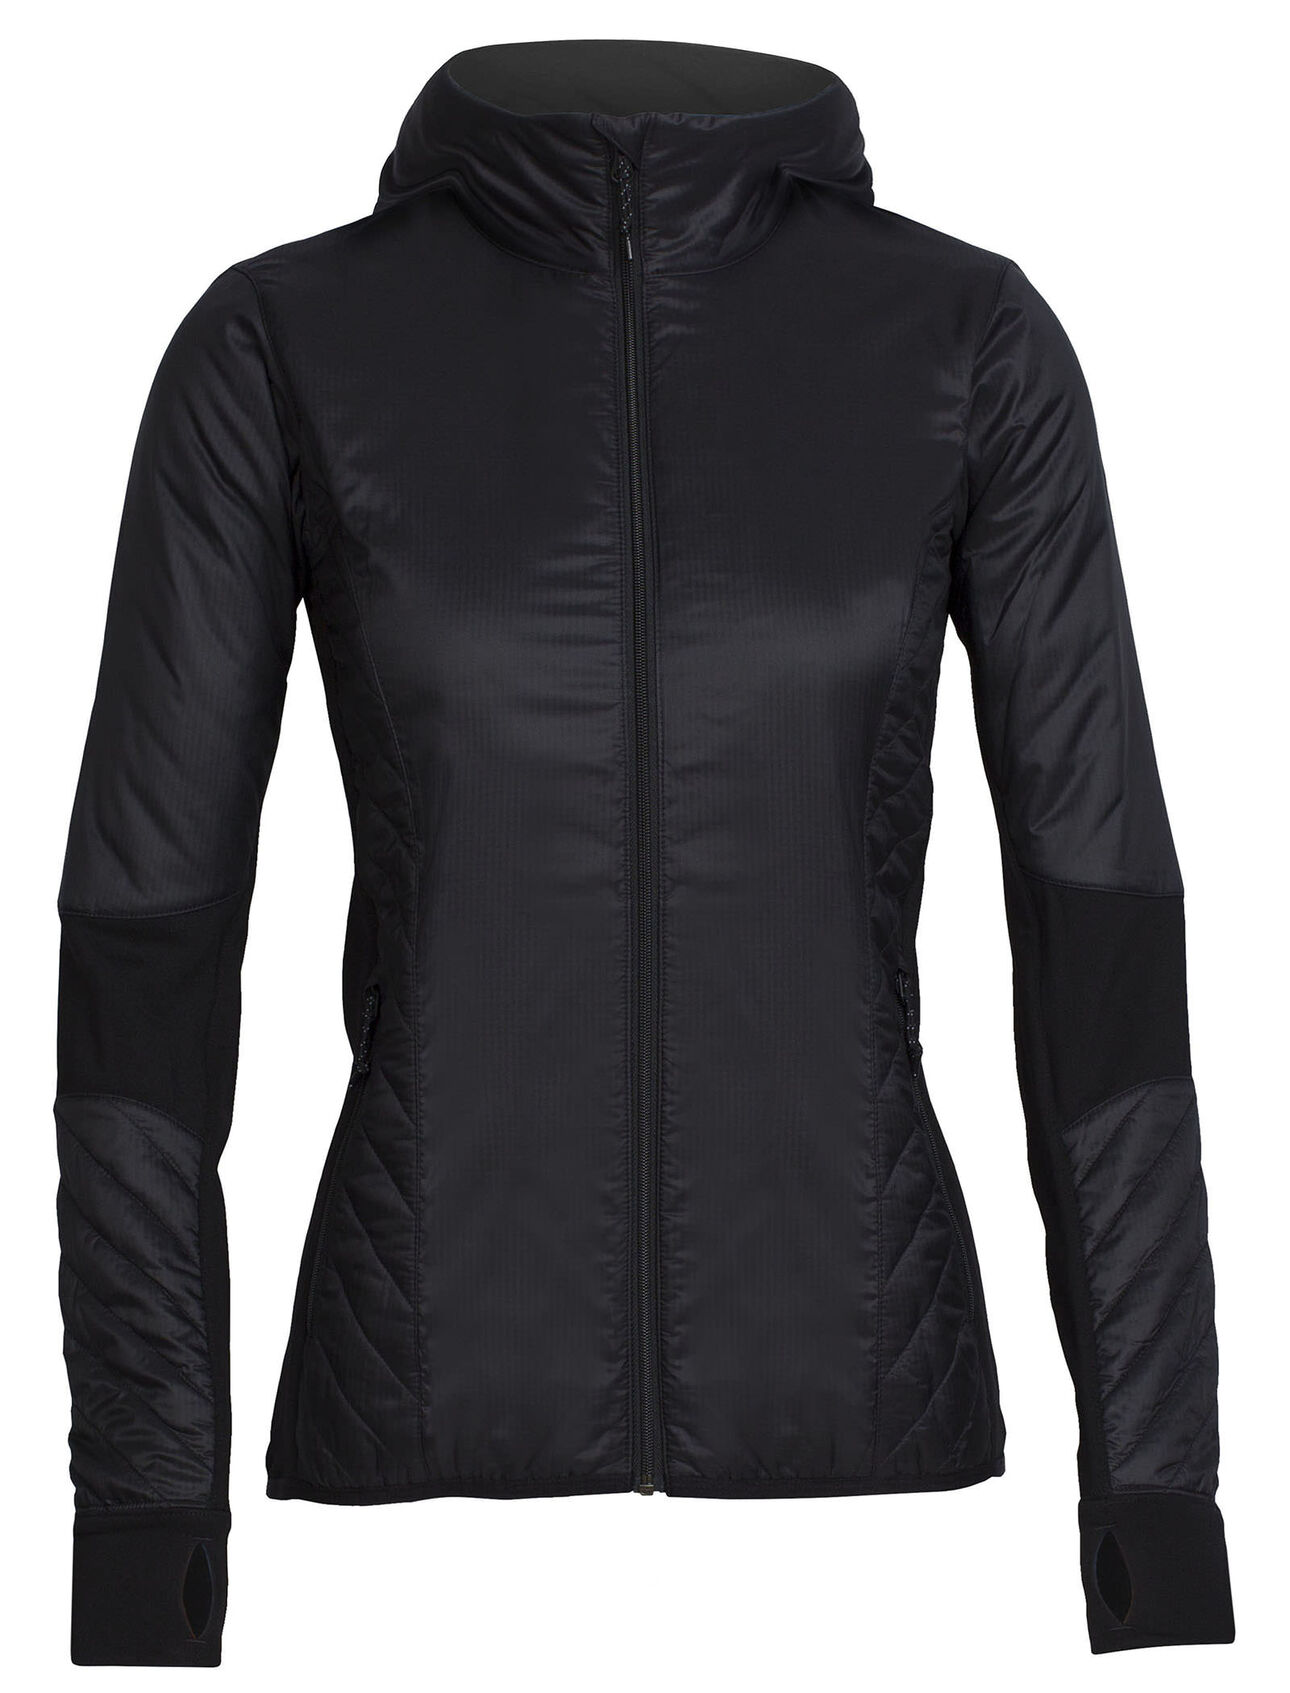 Womens MerinoLOFT™ Helix Long Sleeve Zip Hood Designed as an active alpine midlayer for cold, high-output days of skiing, climbing, snowshoeing or hiking, the Women’s Helix Long Sleeve Zip Hood combines sustainable materials with a sculpted fit.